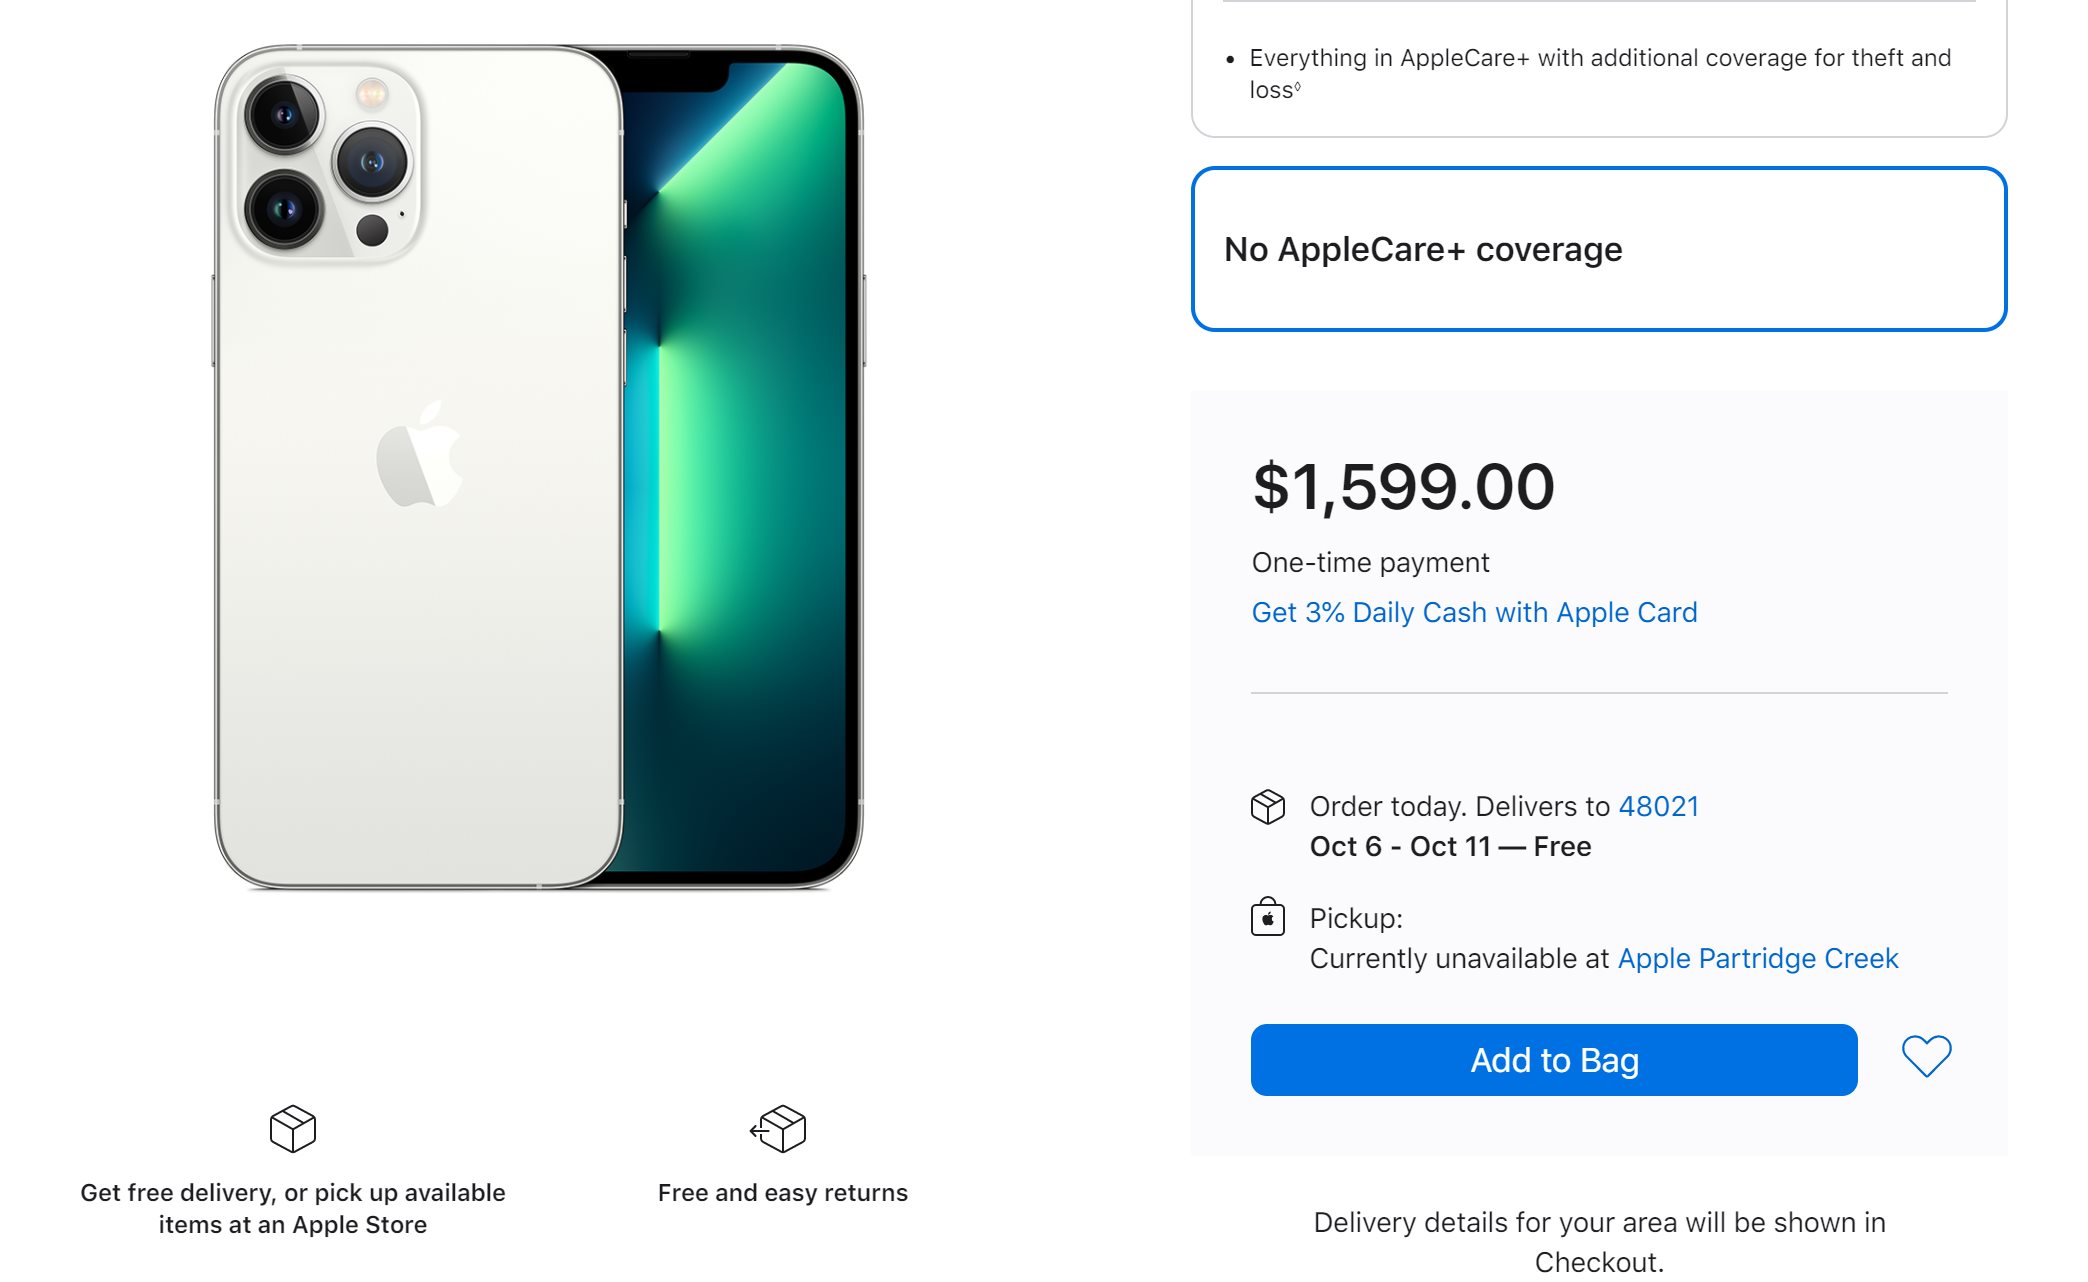 how to purchase applecare for iphone in 11 pro max